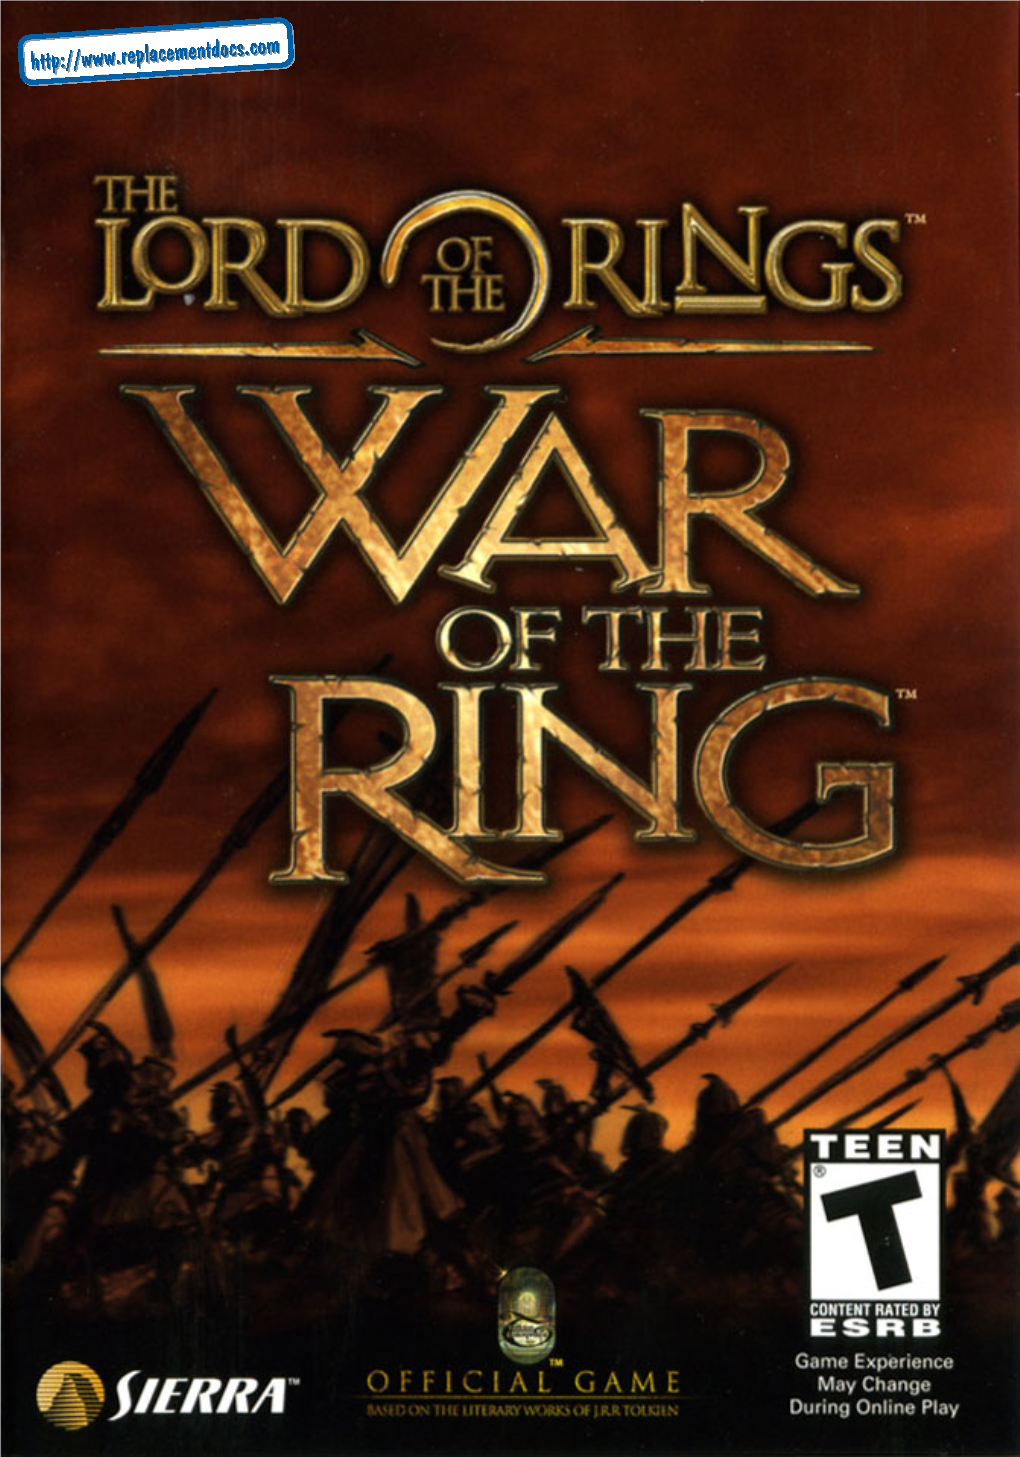 The Lord of the Rings: War of the Ring Manual